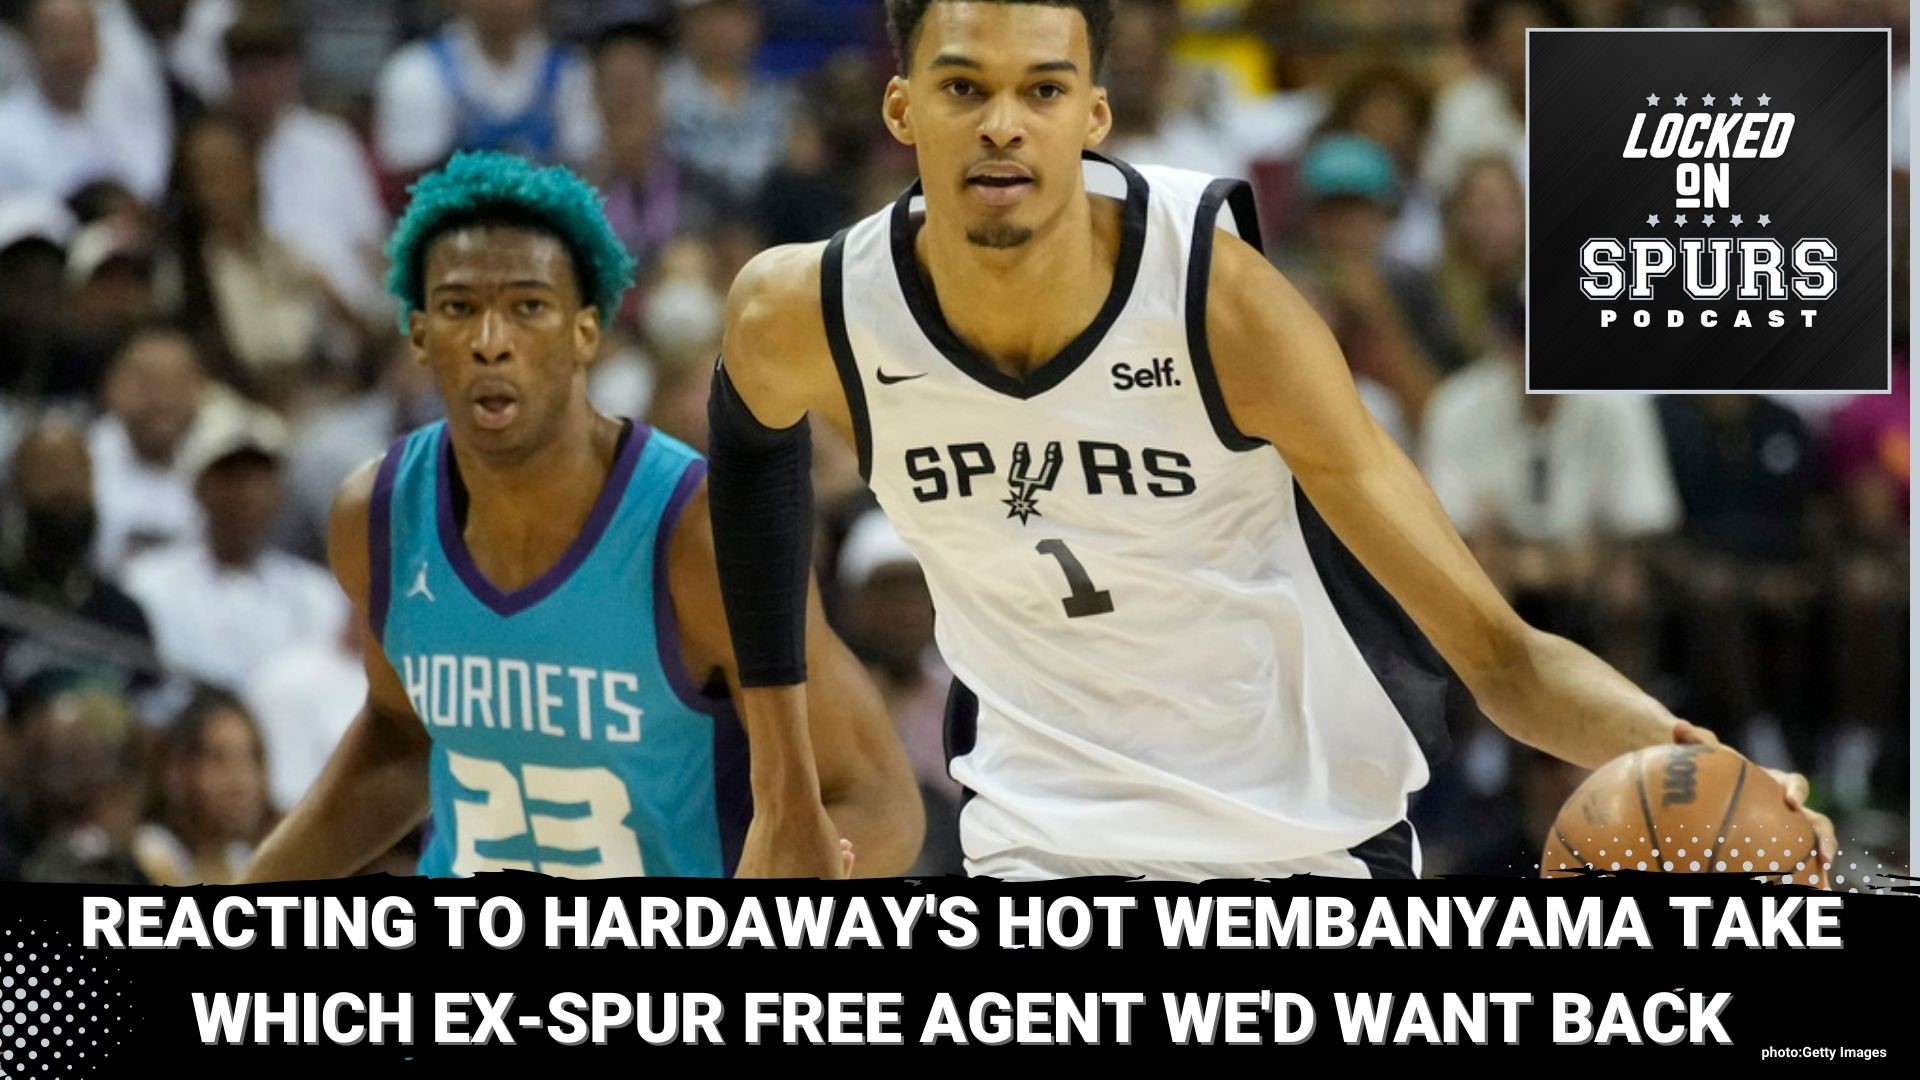 Now this is a scalding hot take on the Spurs' rookie.